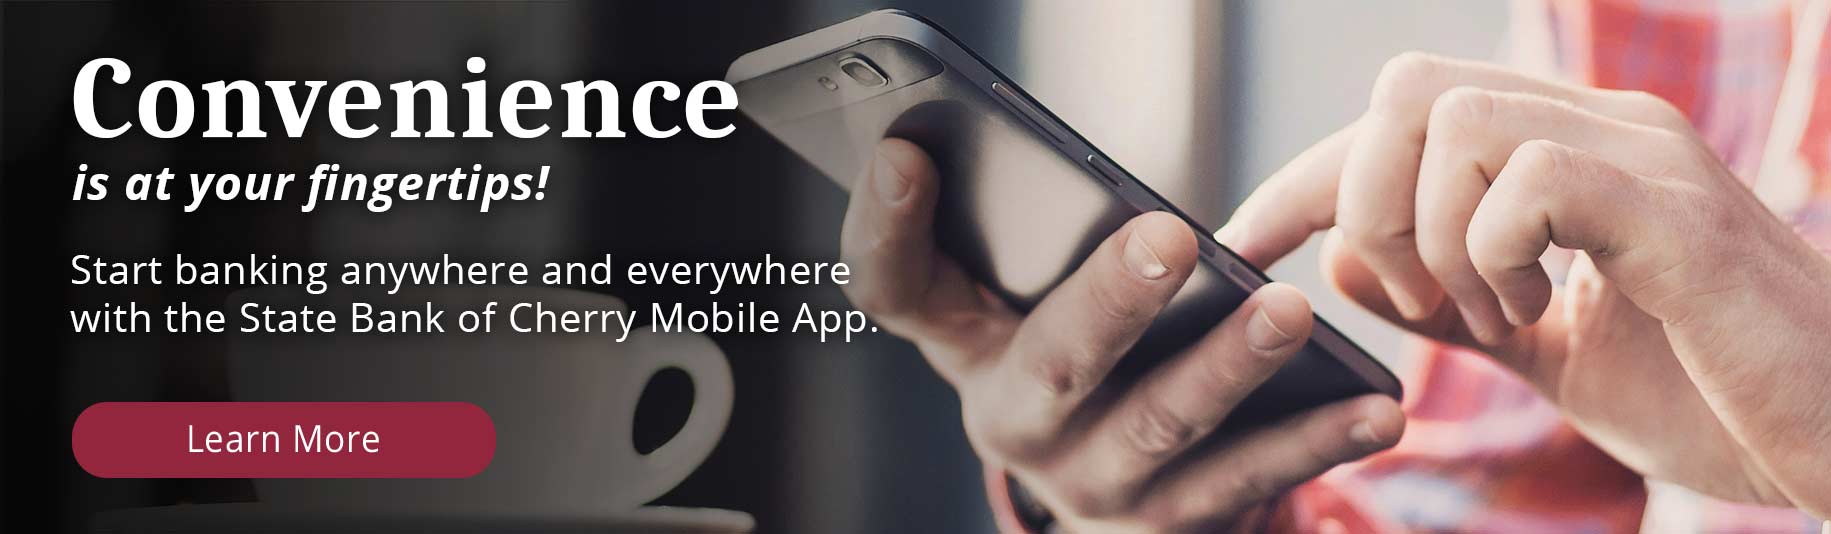 Convenience is at your fingertips! Start banking anywhere and everywhere with the State Bank of Cherry Mobile App. Learn More